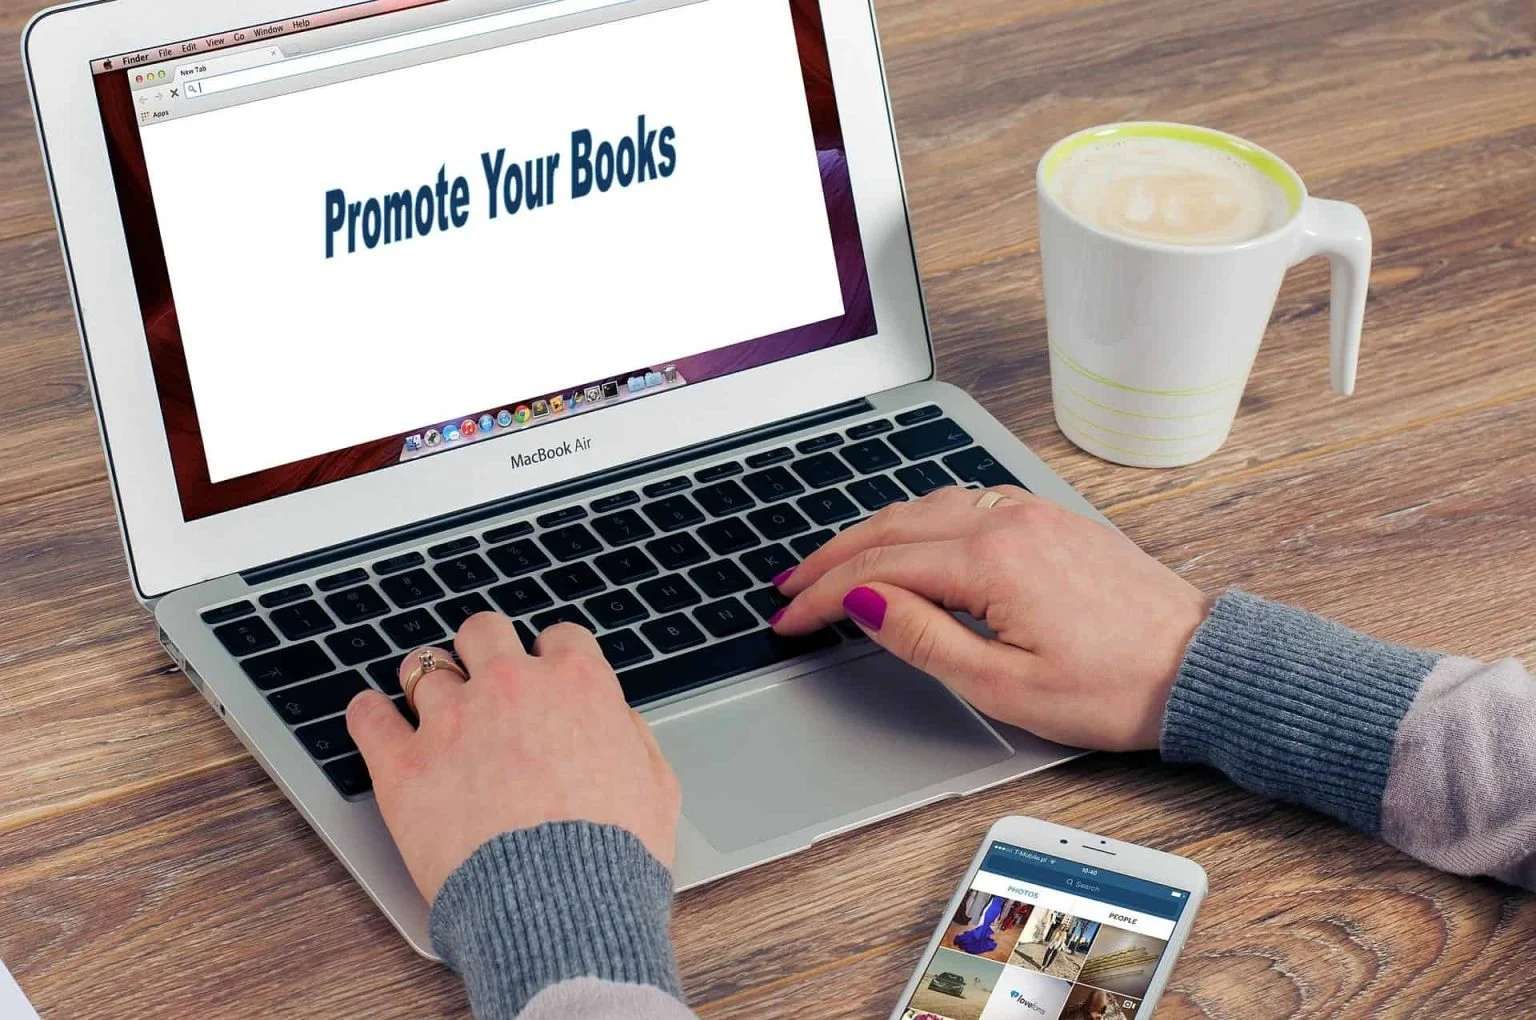 Want to know how to market your book professionally?